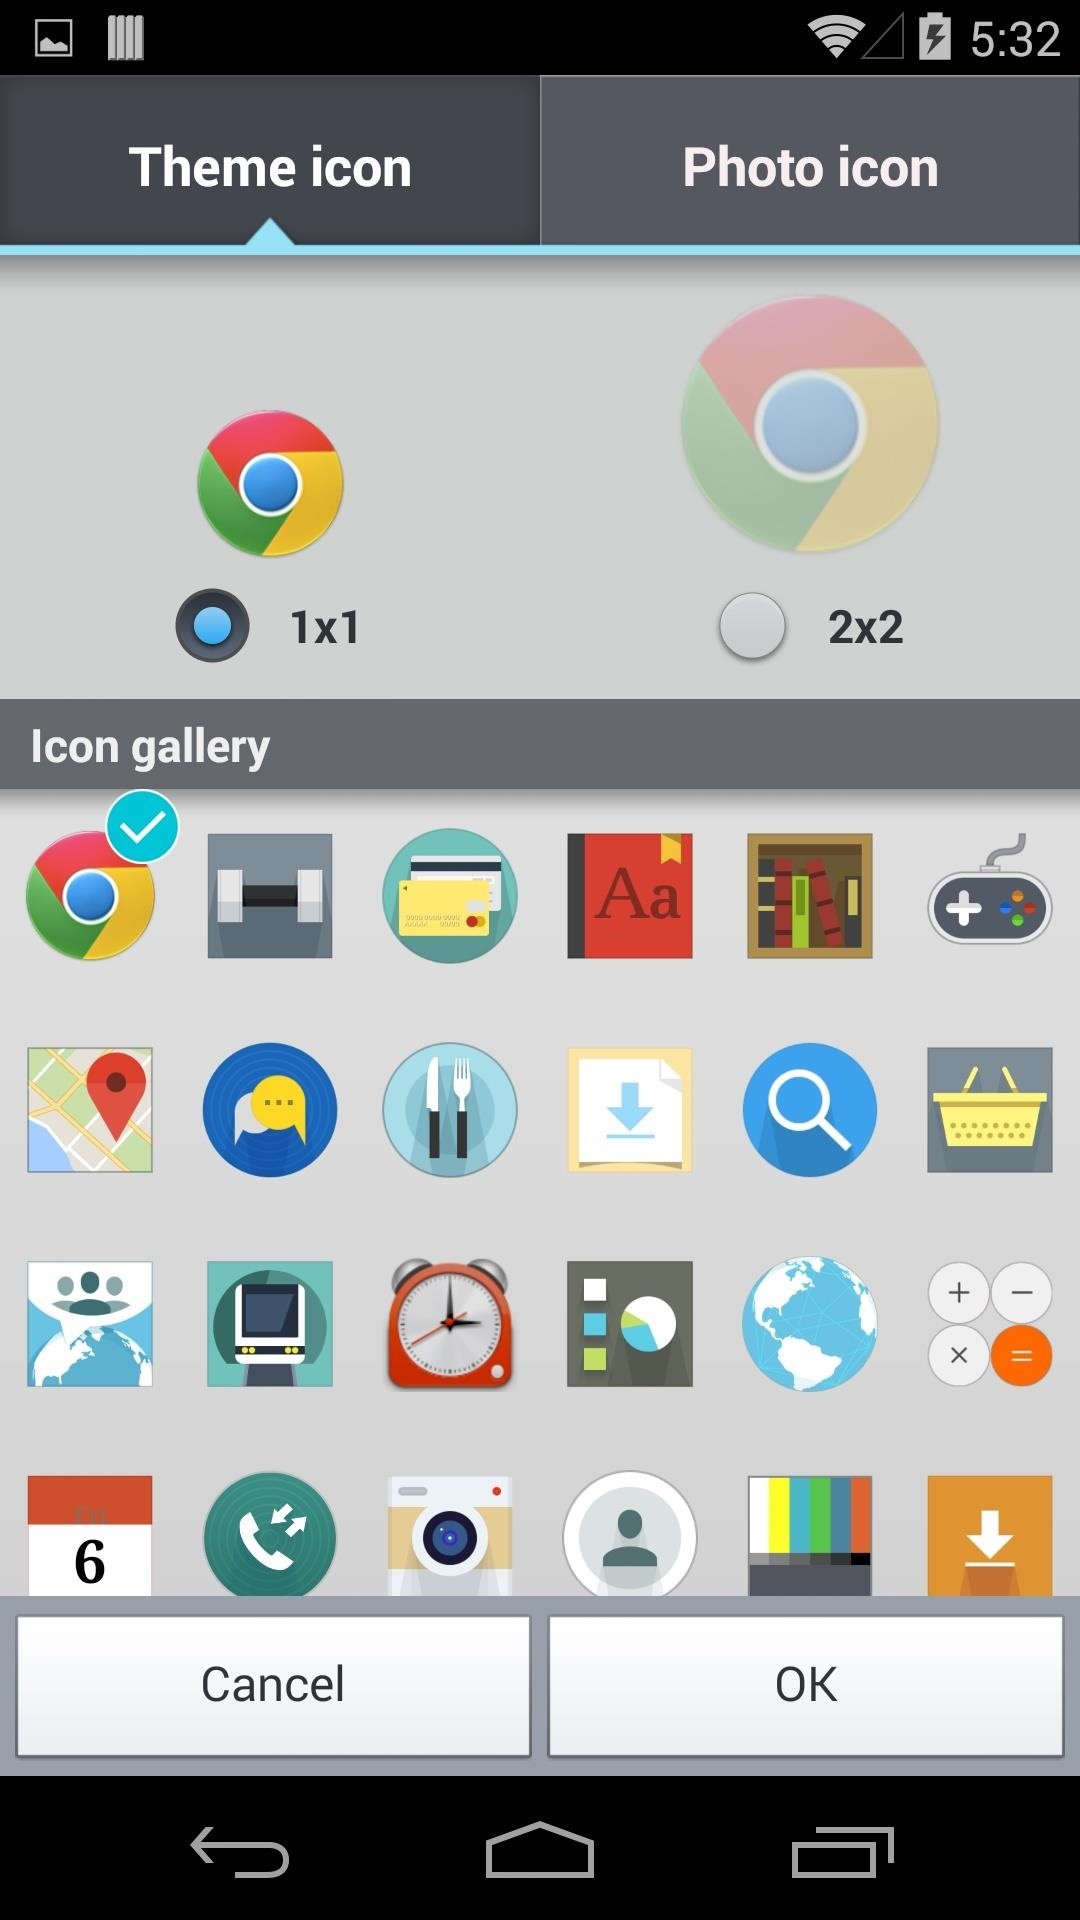 How to Get the LG G3's Exclusive "Home" Launcher on Your HTC One or Other Android Device